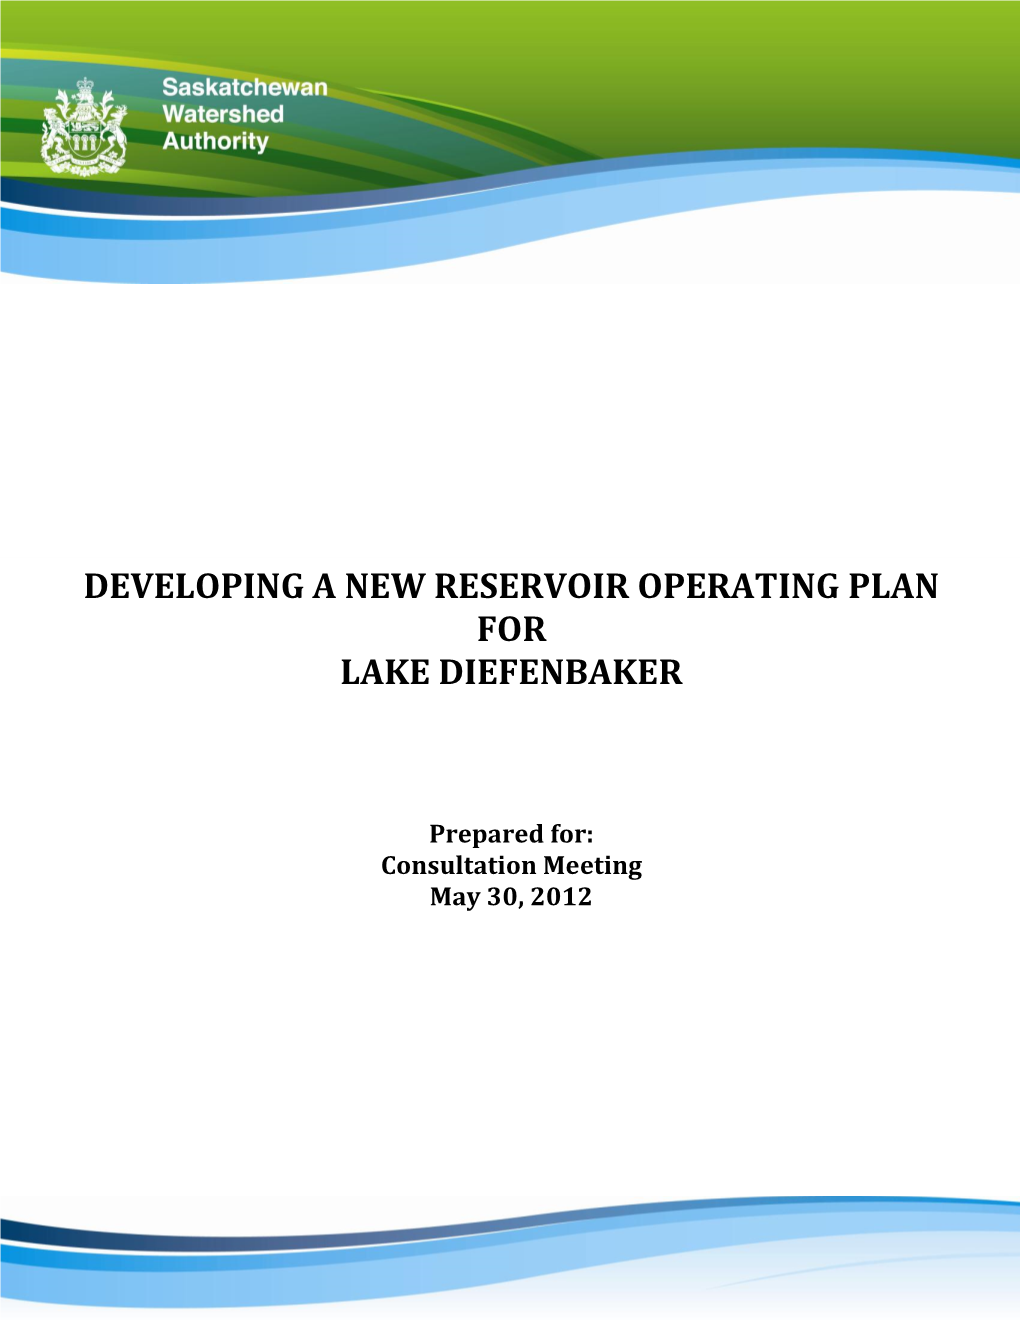 Developing a New Reservoir Operating Plan for Lake Diefenbaker